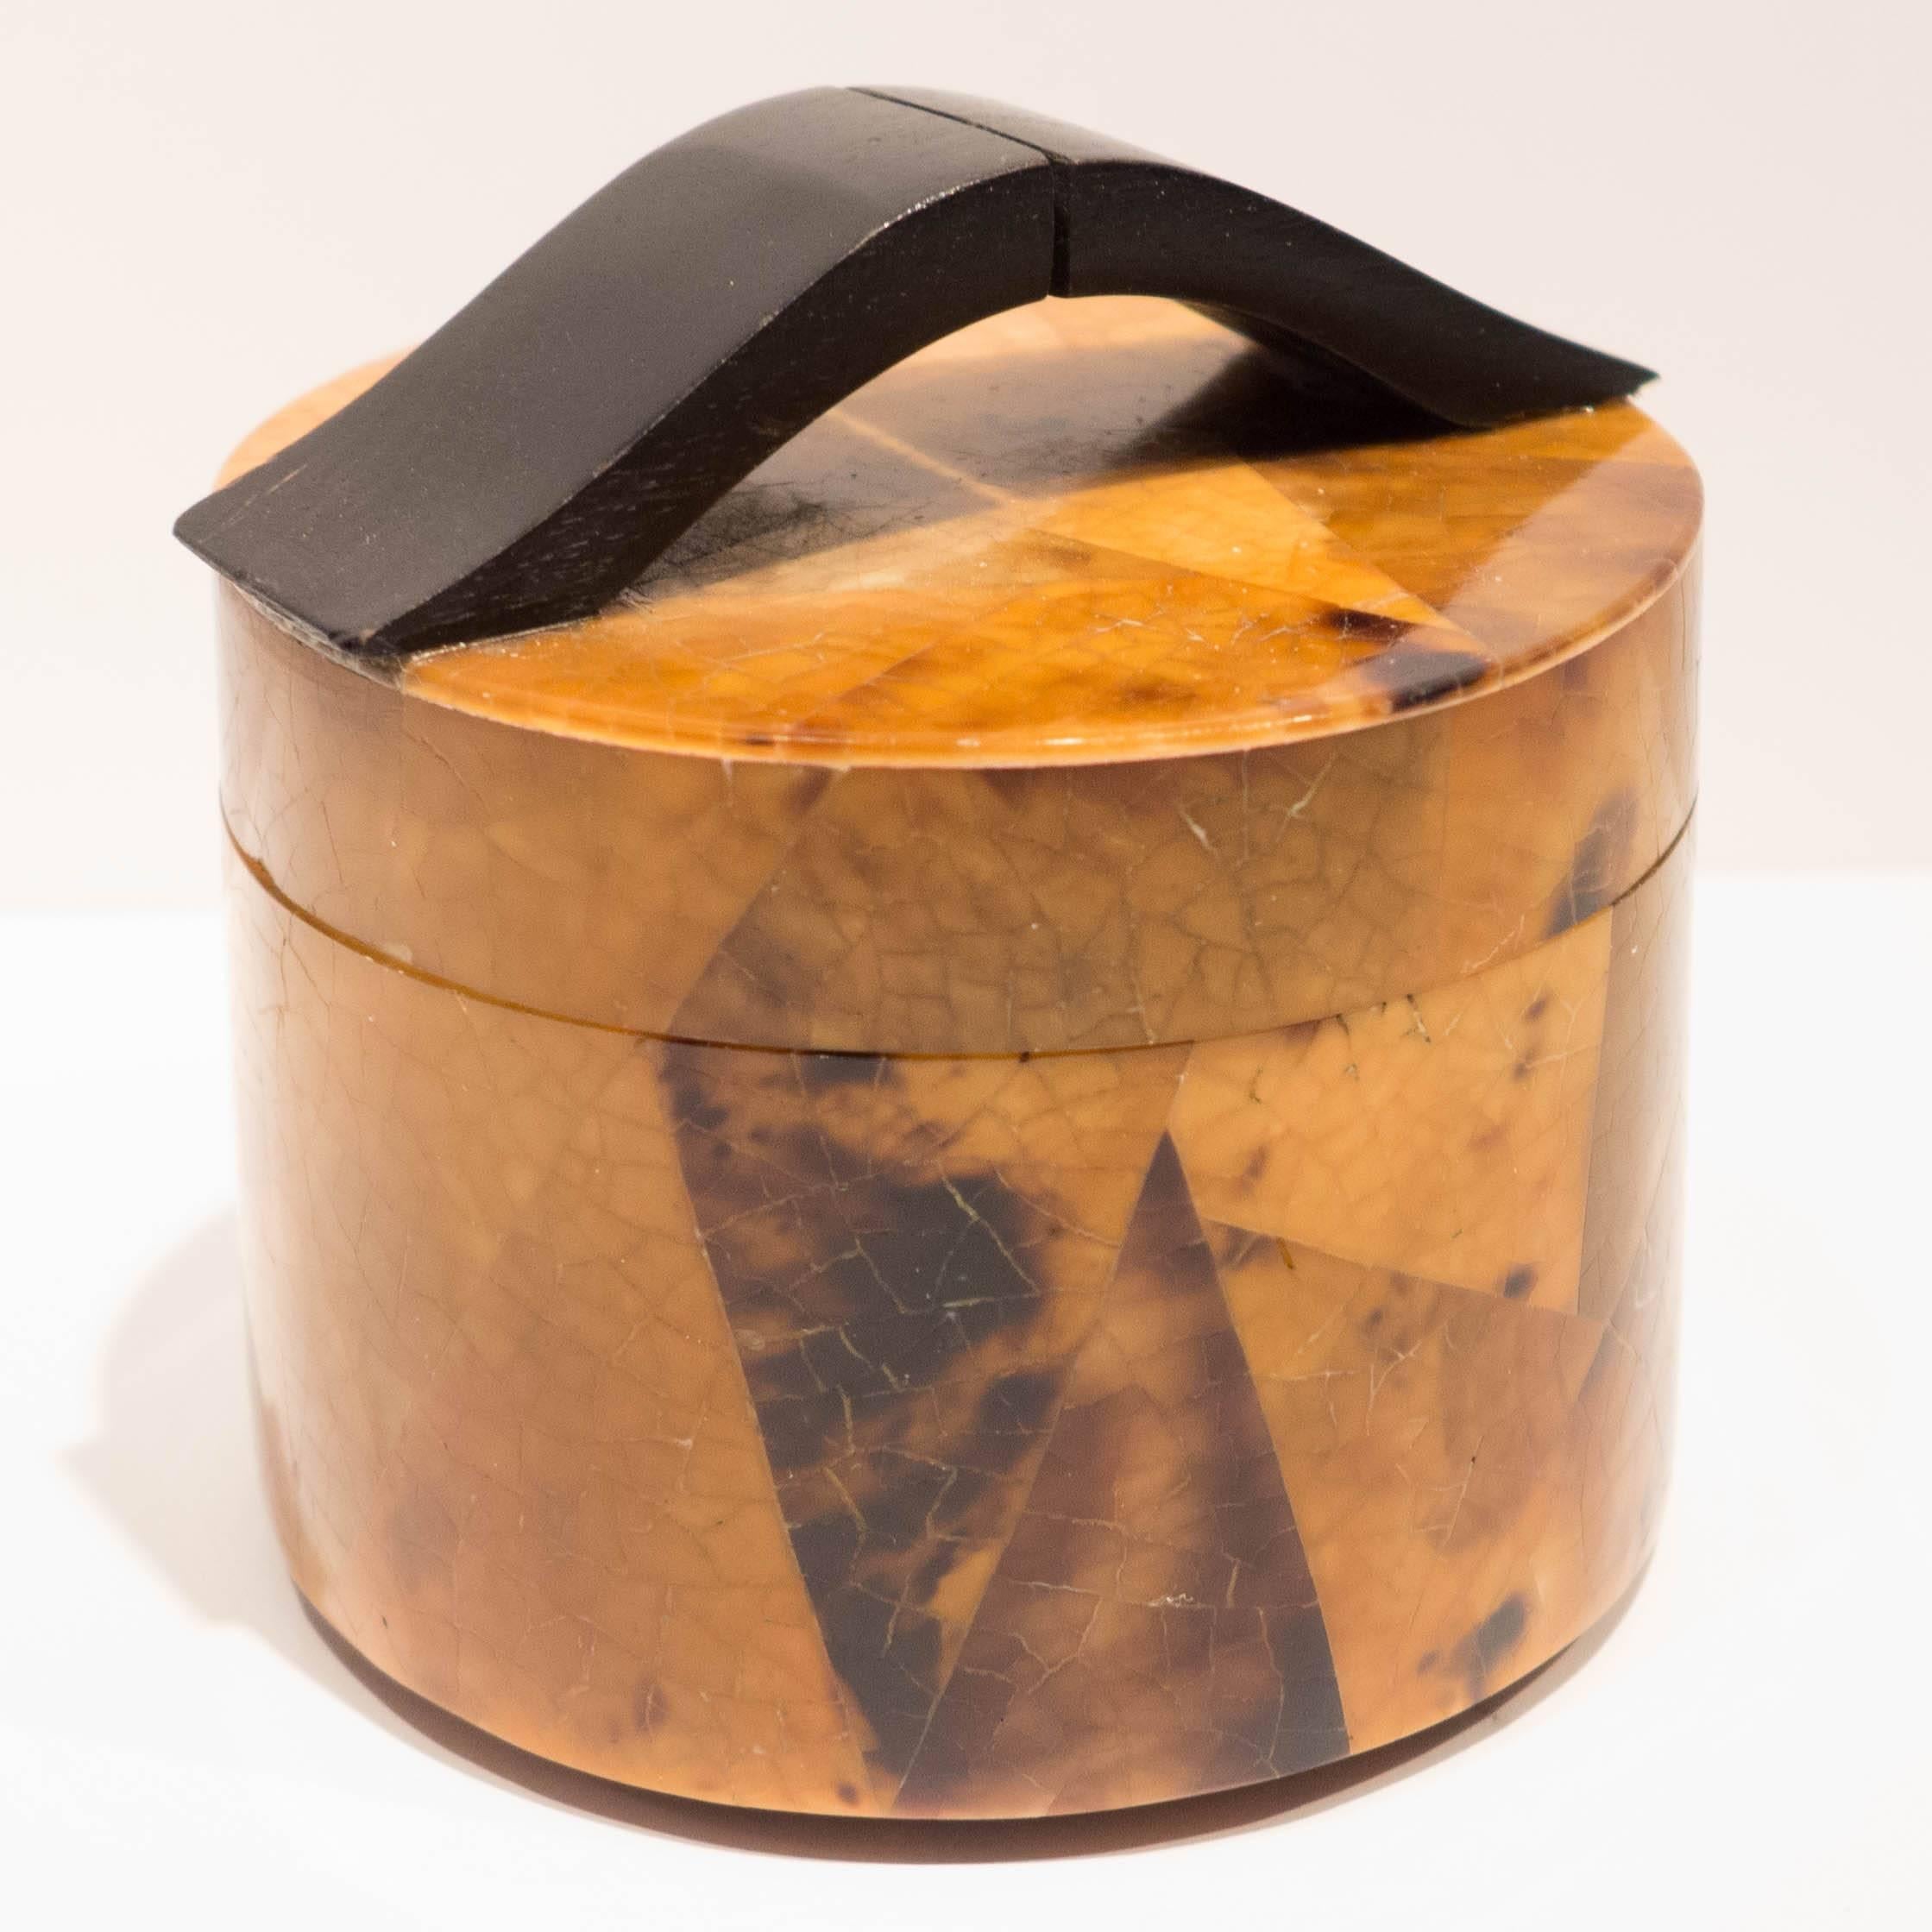 Small round box with curved wooden handles and a crushed shell veneer over mahogany. With an abstract deco pattern. By Ria And Yiouri Augousti of Paris, circa 1980s. Stamped on leather lining underneath.